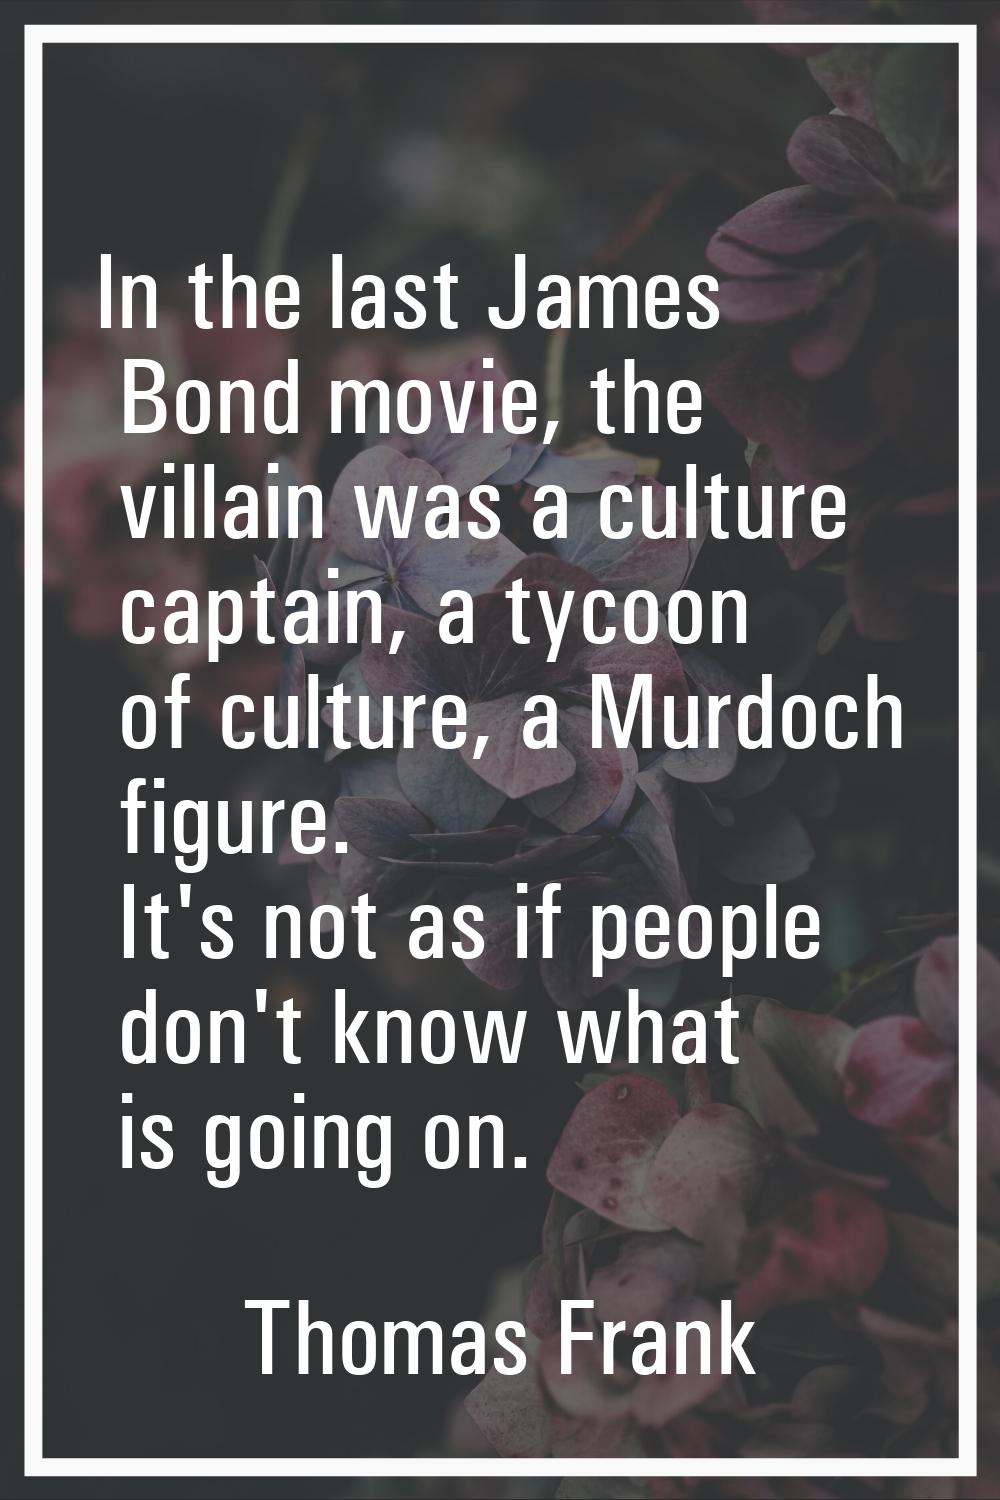 In the last James Bond movie, the villain was a culture captain, a tycoon of culture, a Murdoch fig